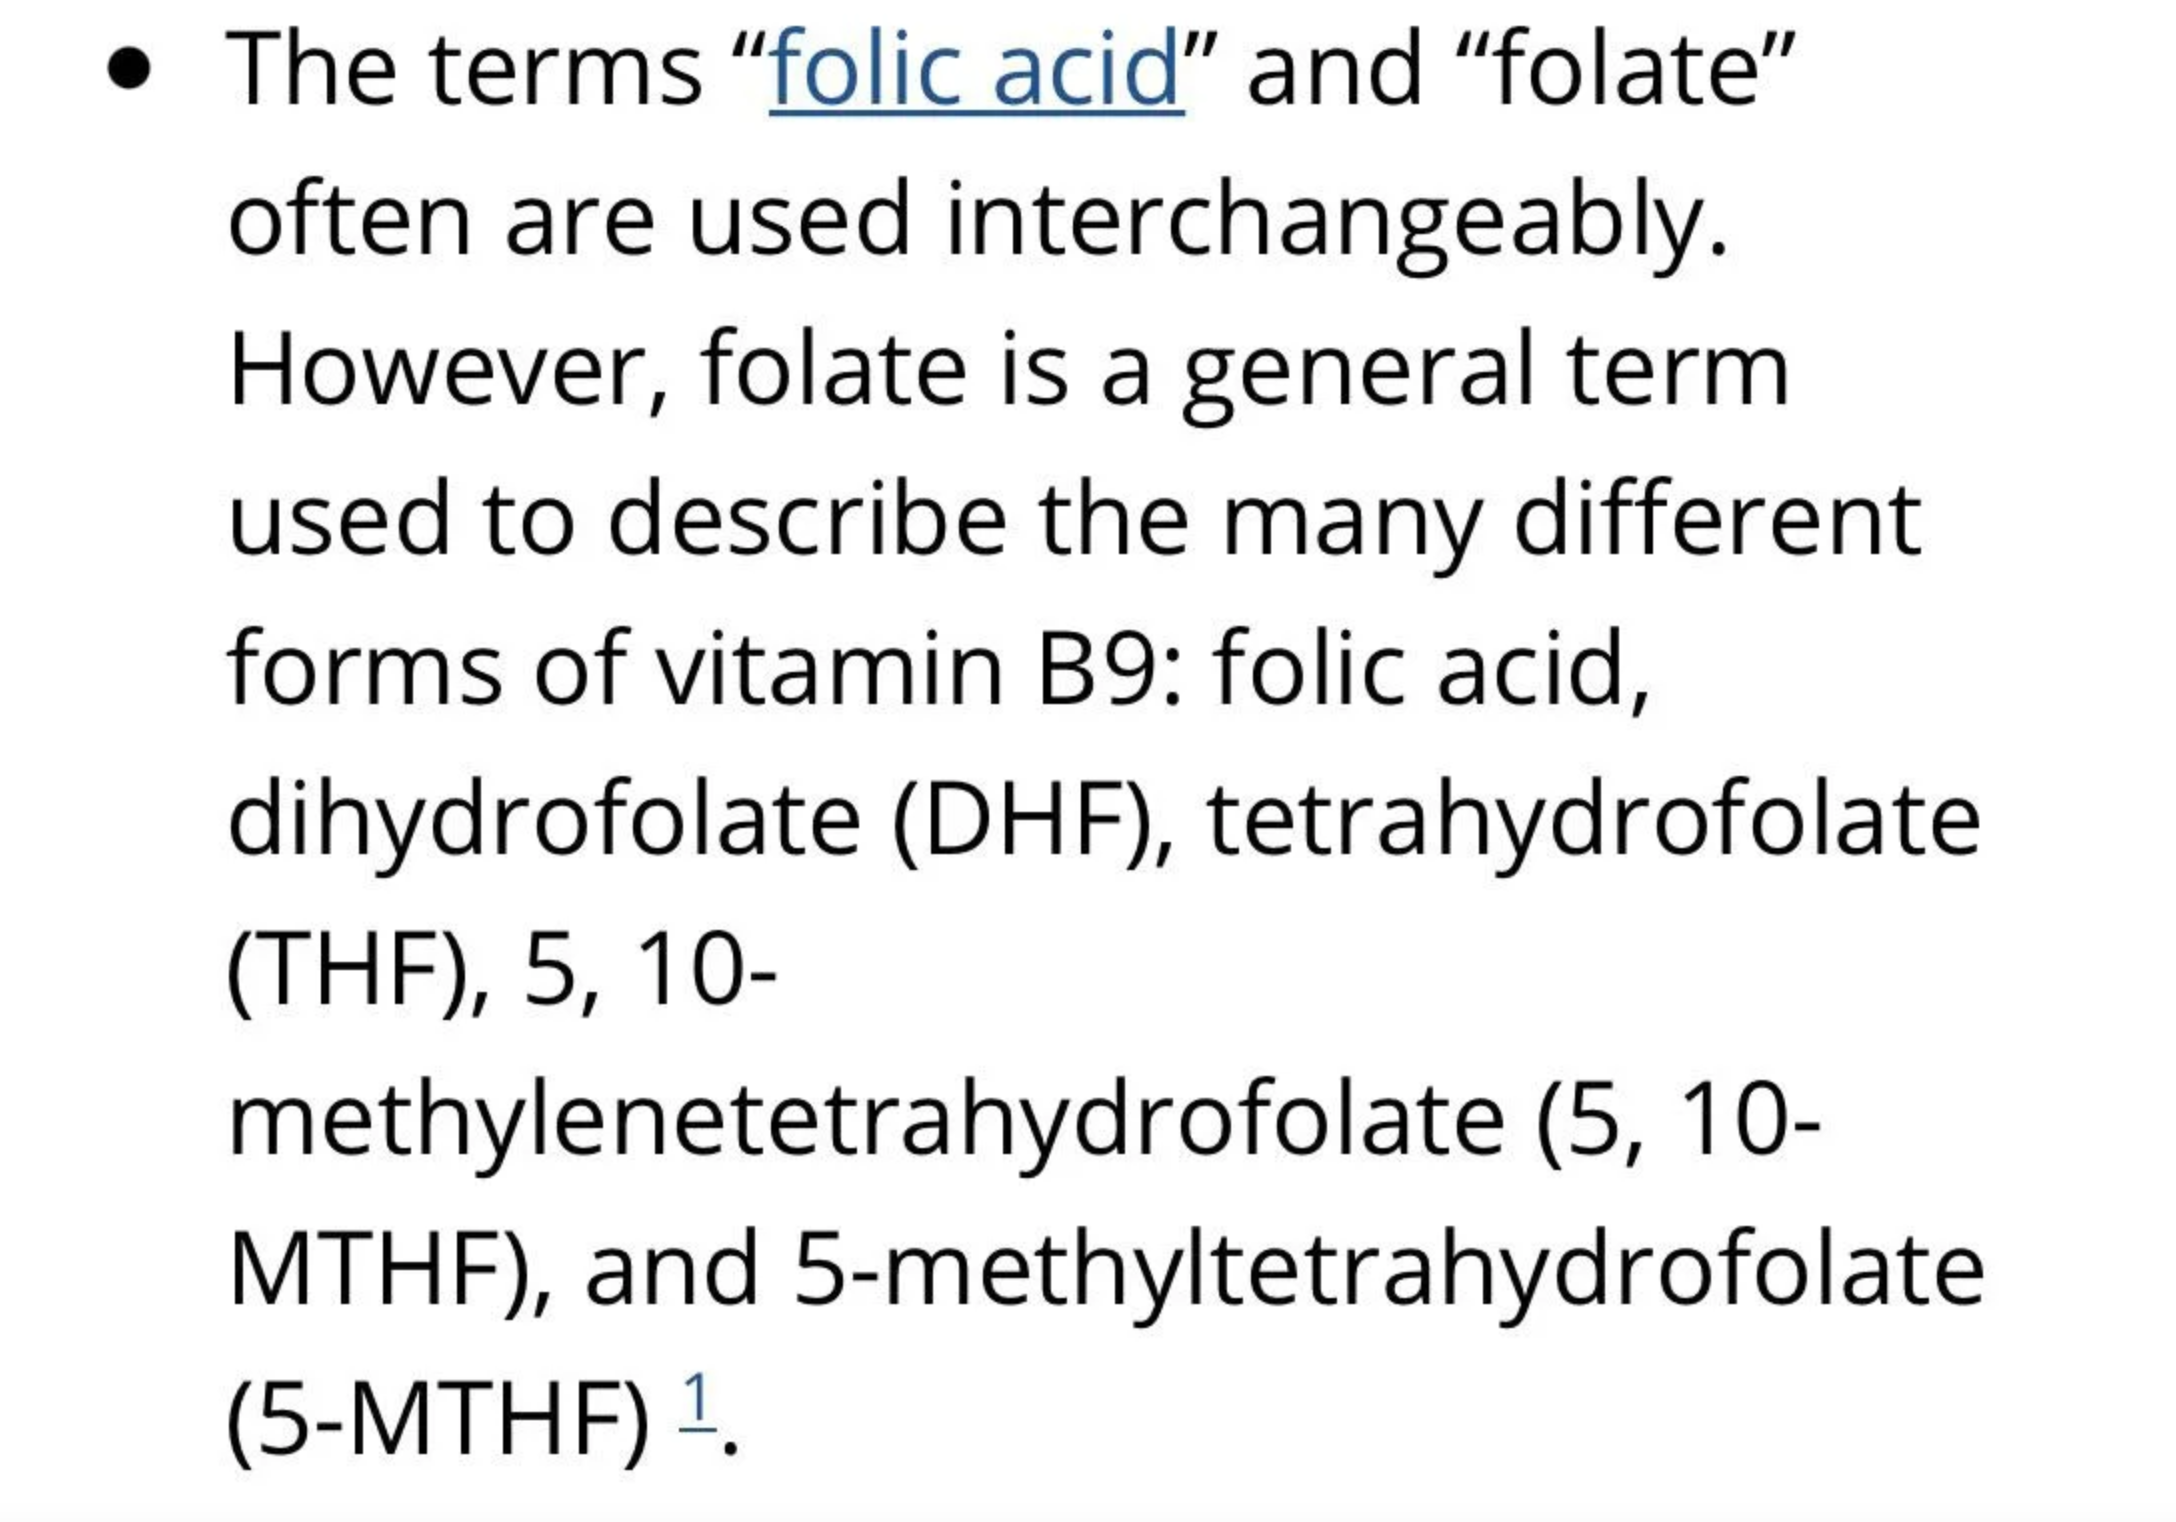 &quot;Folic acid&quot; and &quot;folate&quot; are often used interchangeably, but &quot;folate&quot; is a general term for many forms of vitamin B9